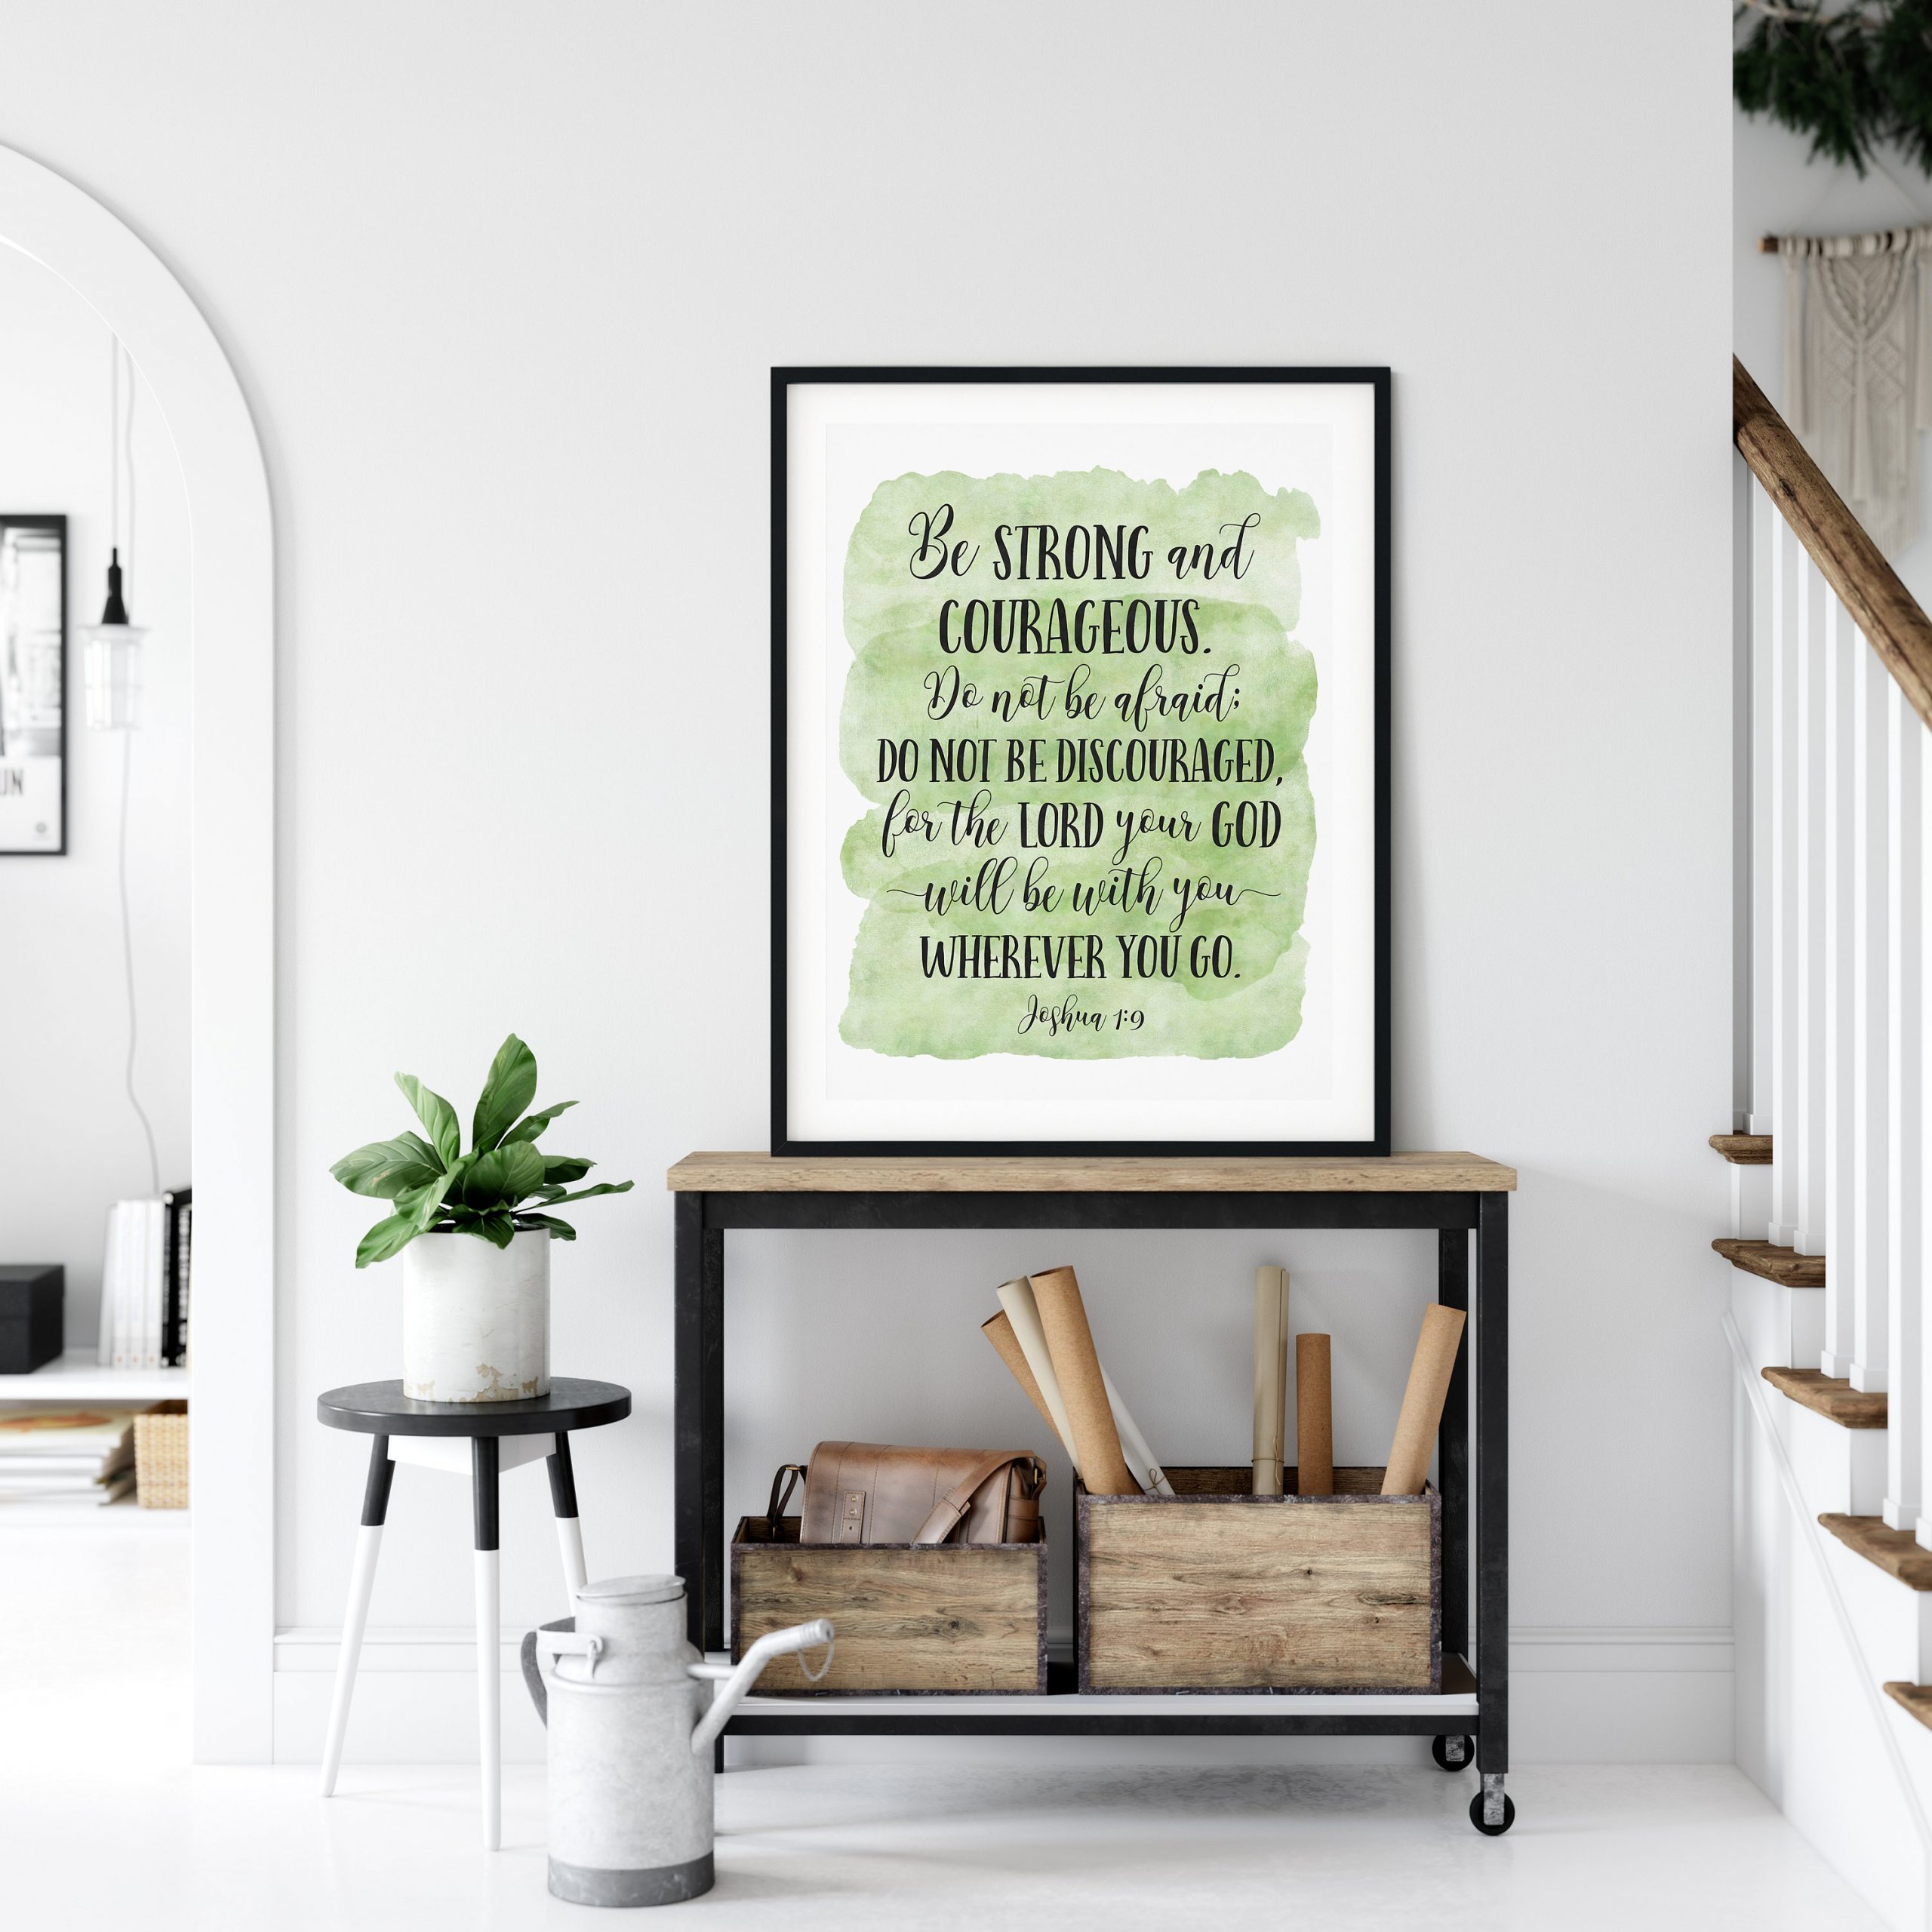 Be Strong And Courageous, Joshua 1:9, Bible Verse Printable Wall Art, Nursery Quotes